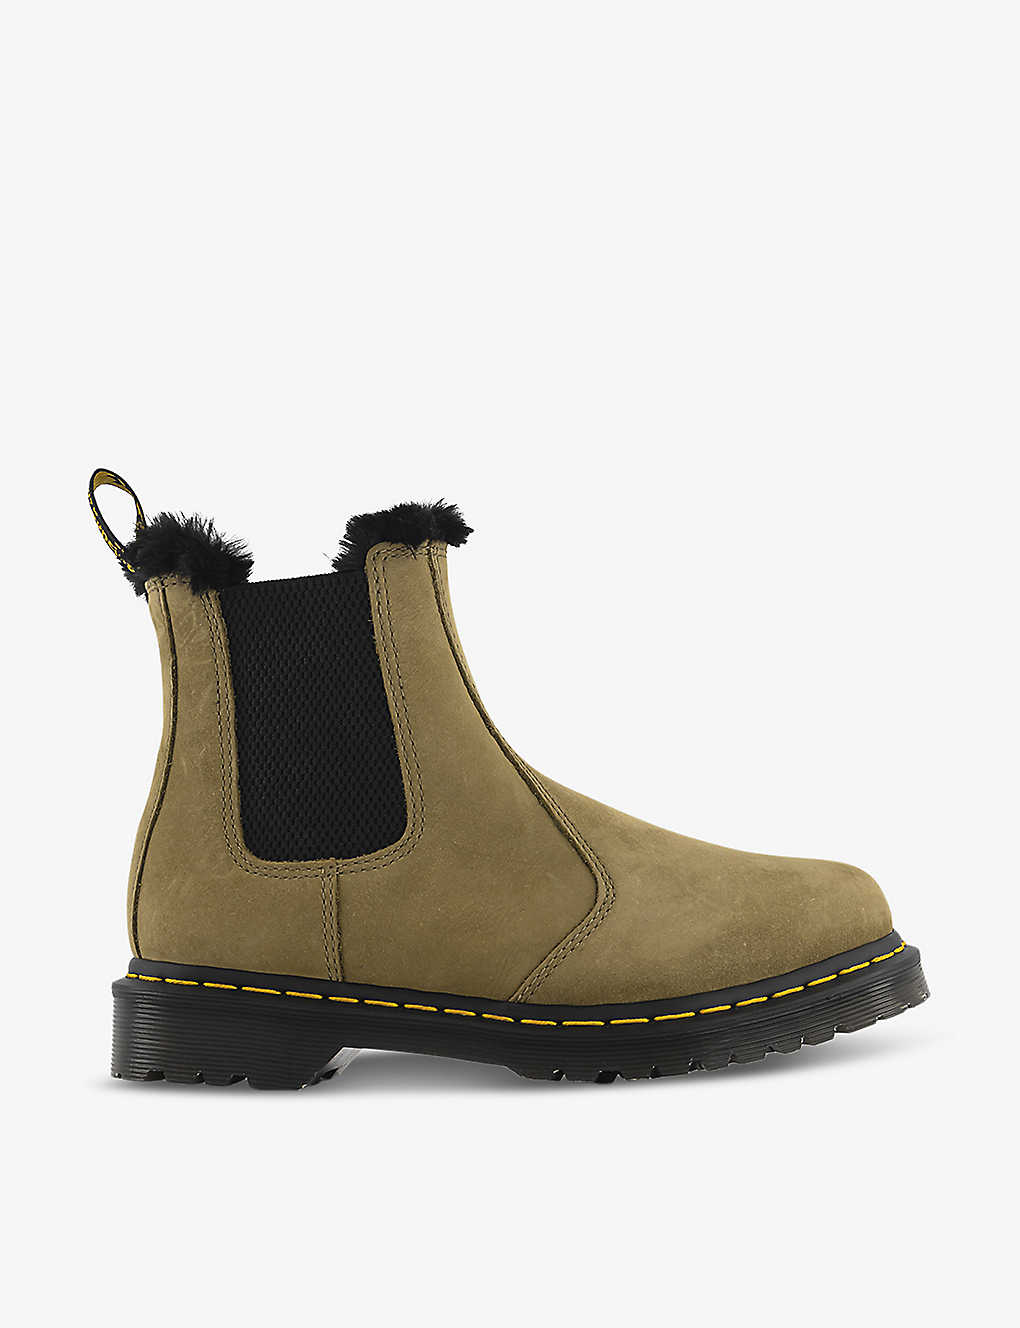 Dr. Martens Womens Olive Black 2976 Leonore Faux Fur-lined Leather Boots